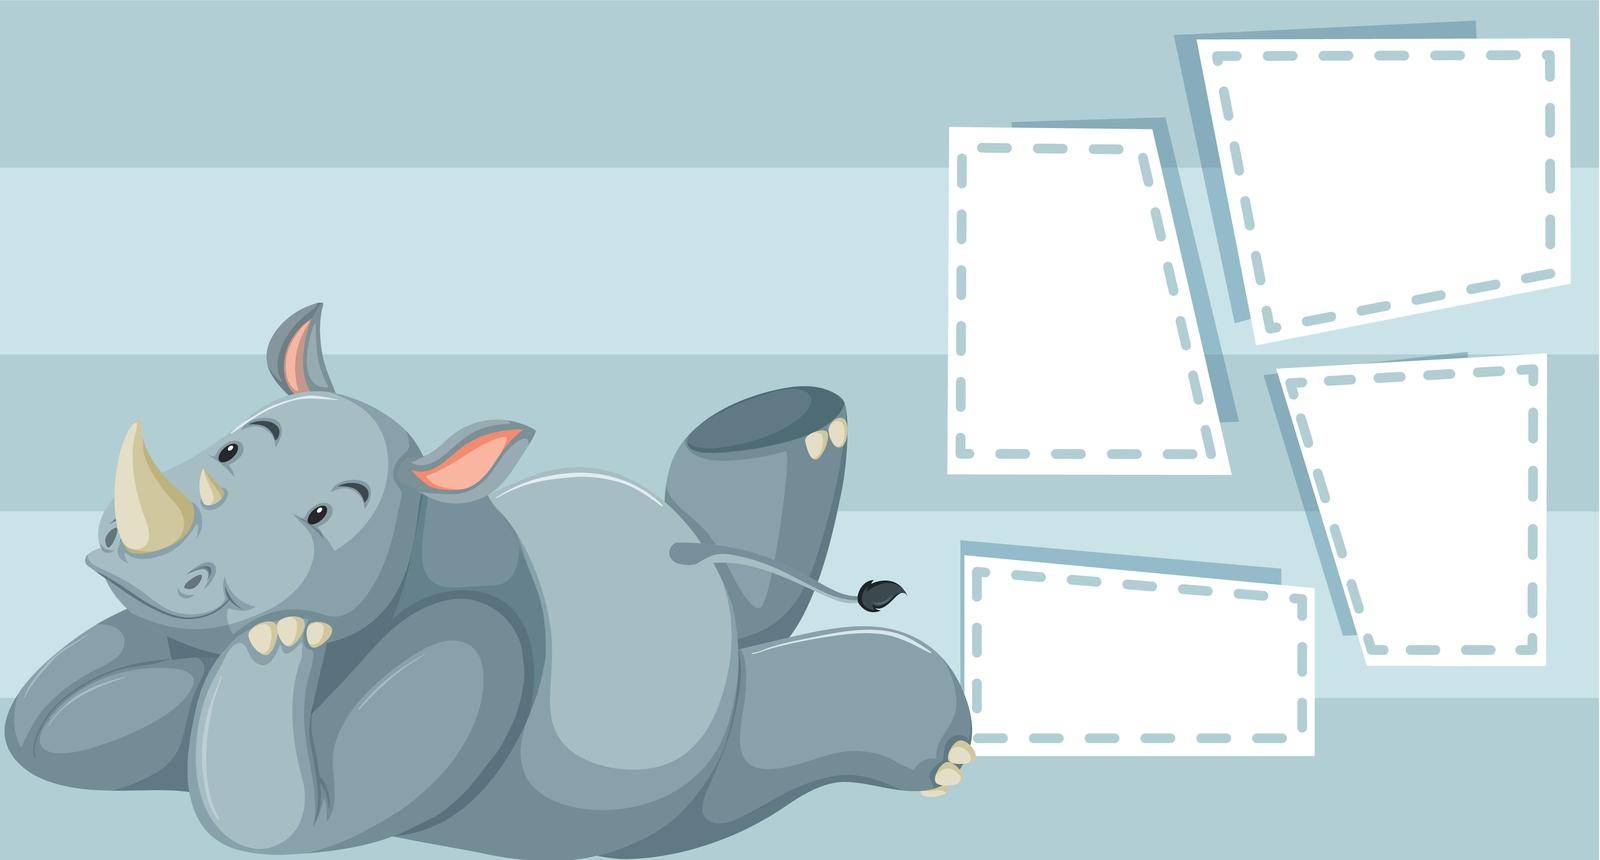 A rhinoceros on note template illustration